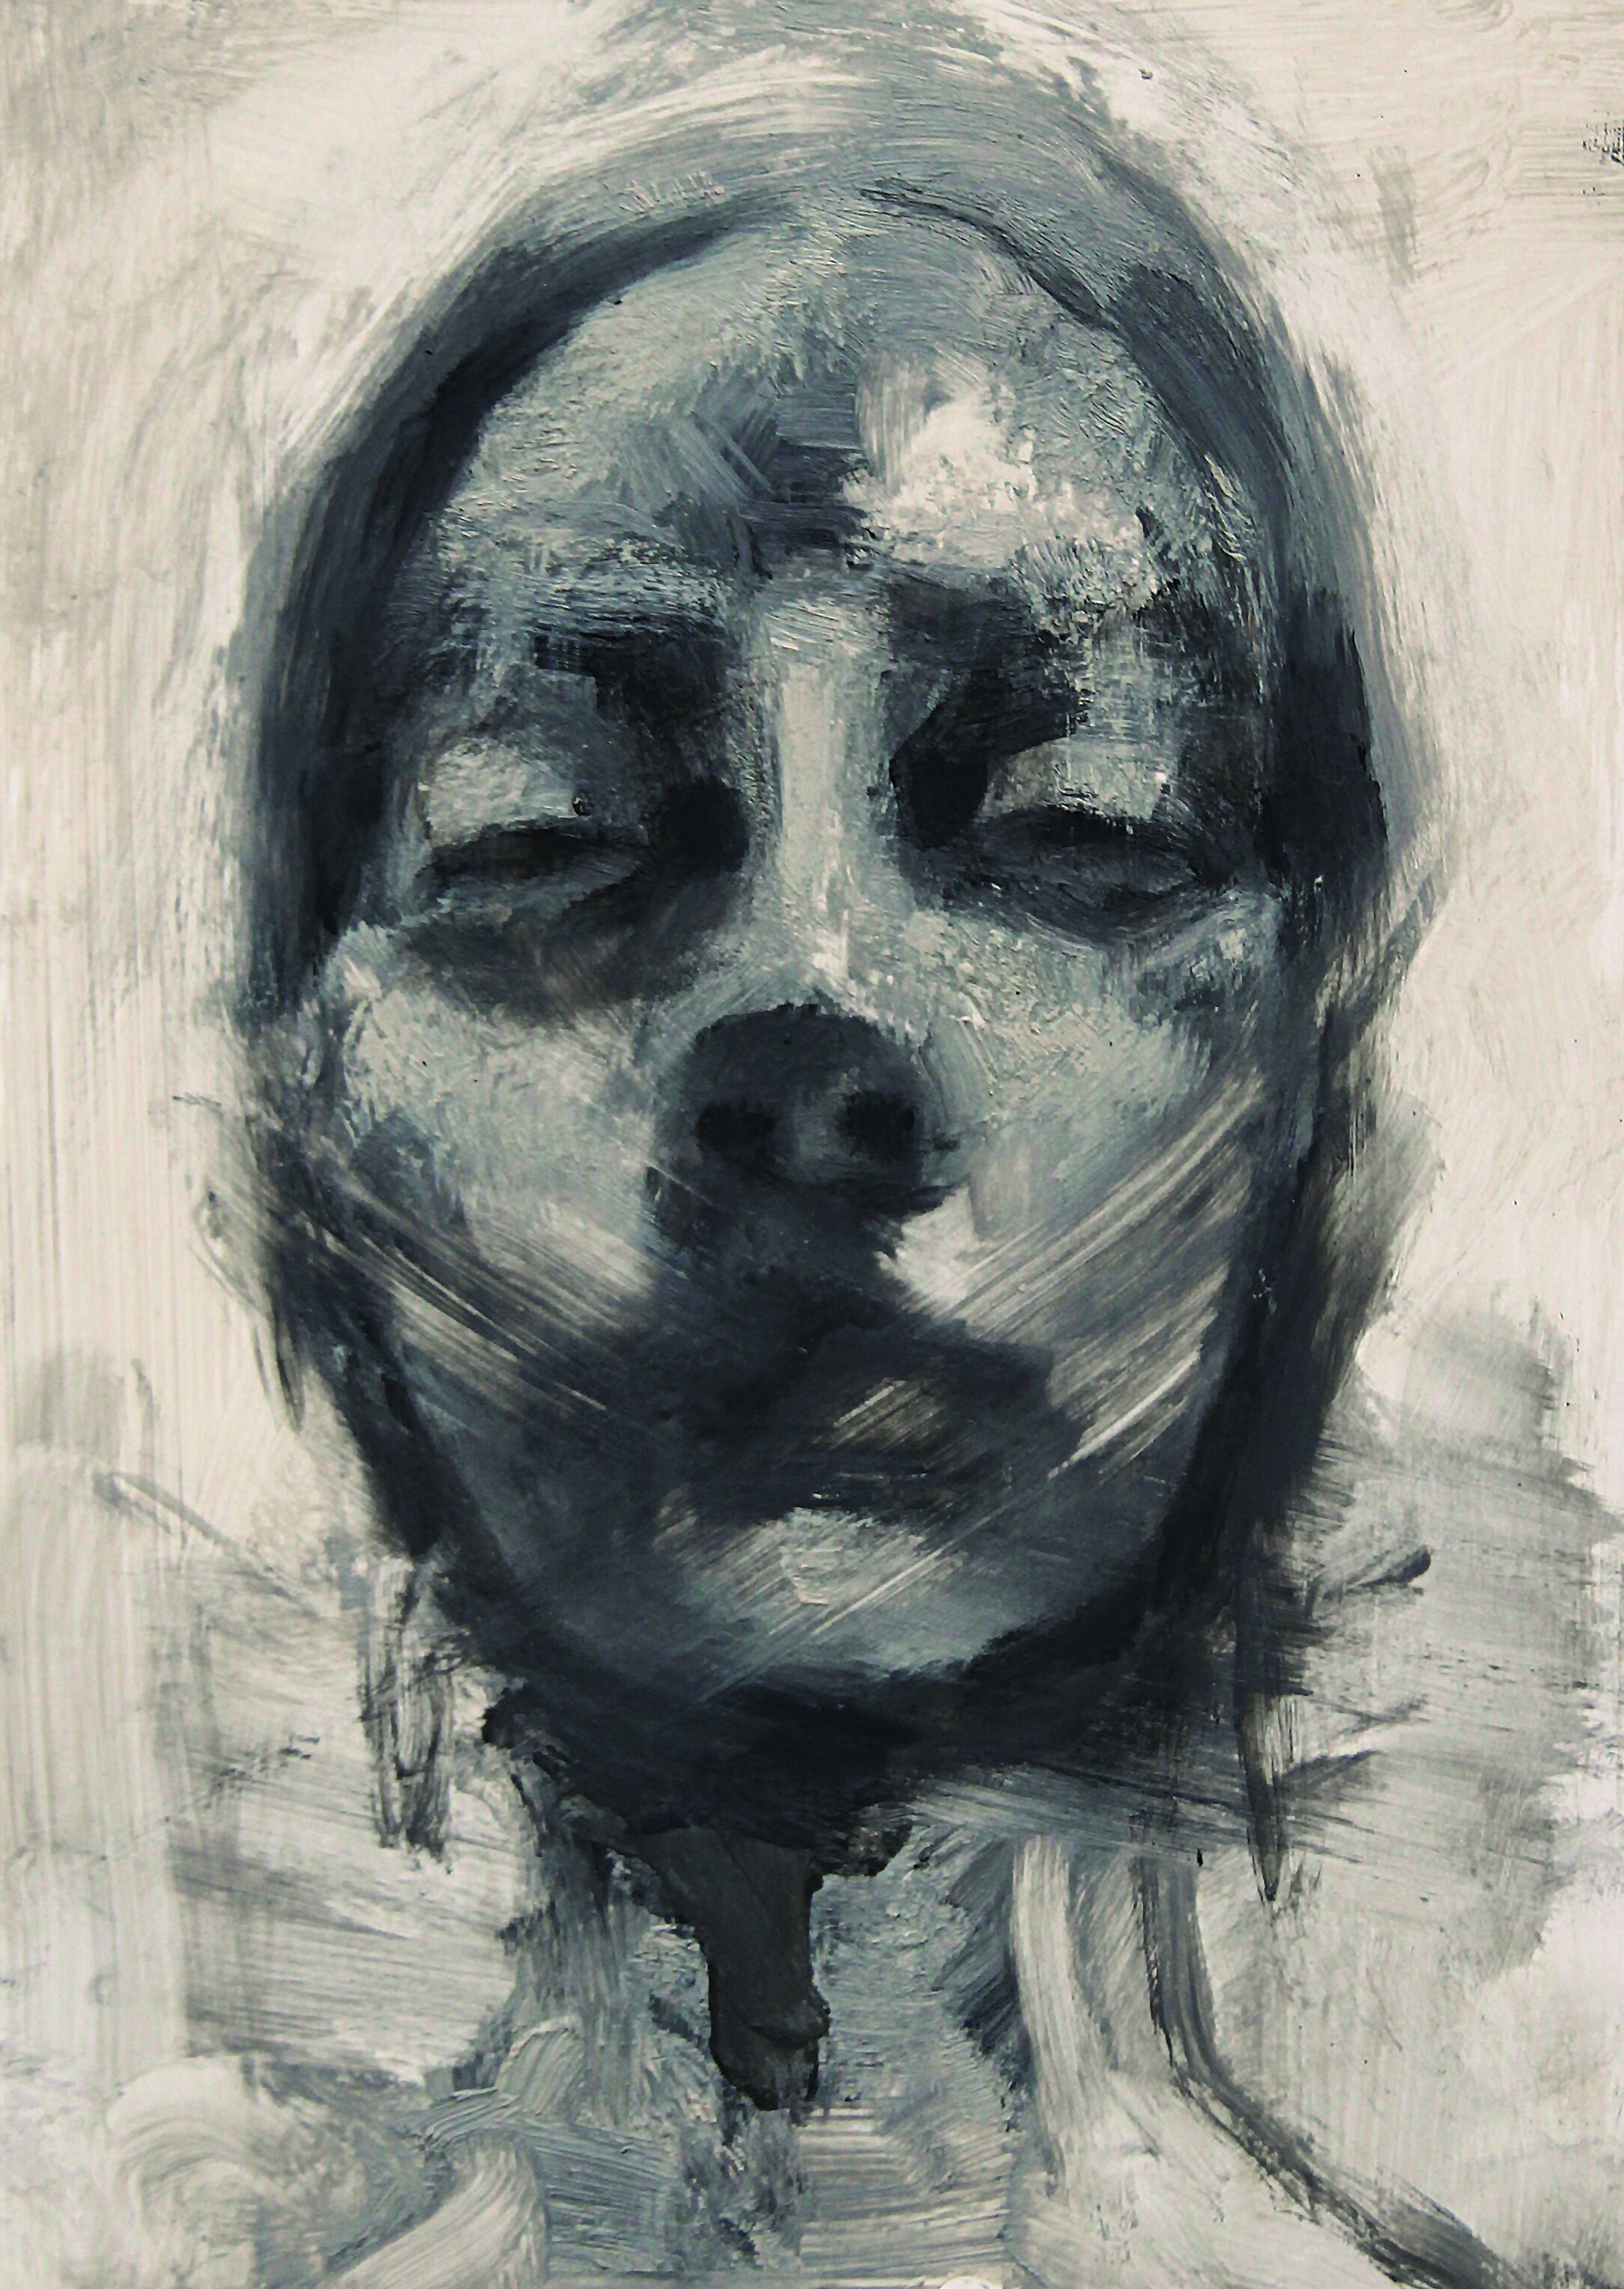 Anonymous (no. unknown), 2015